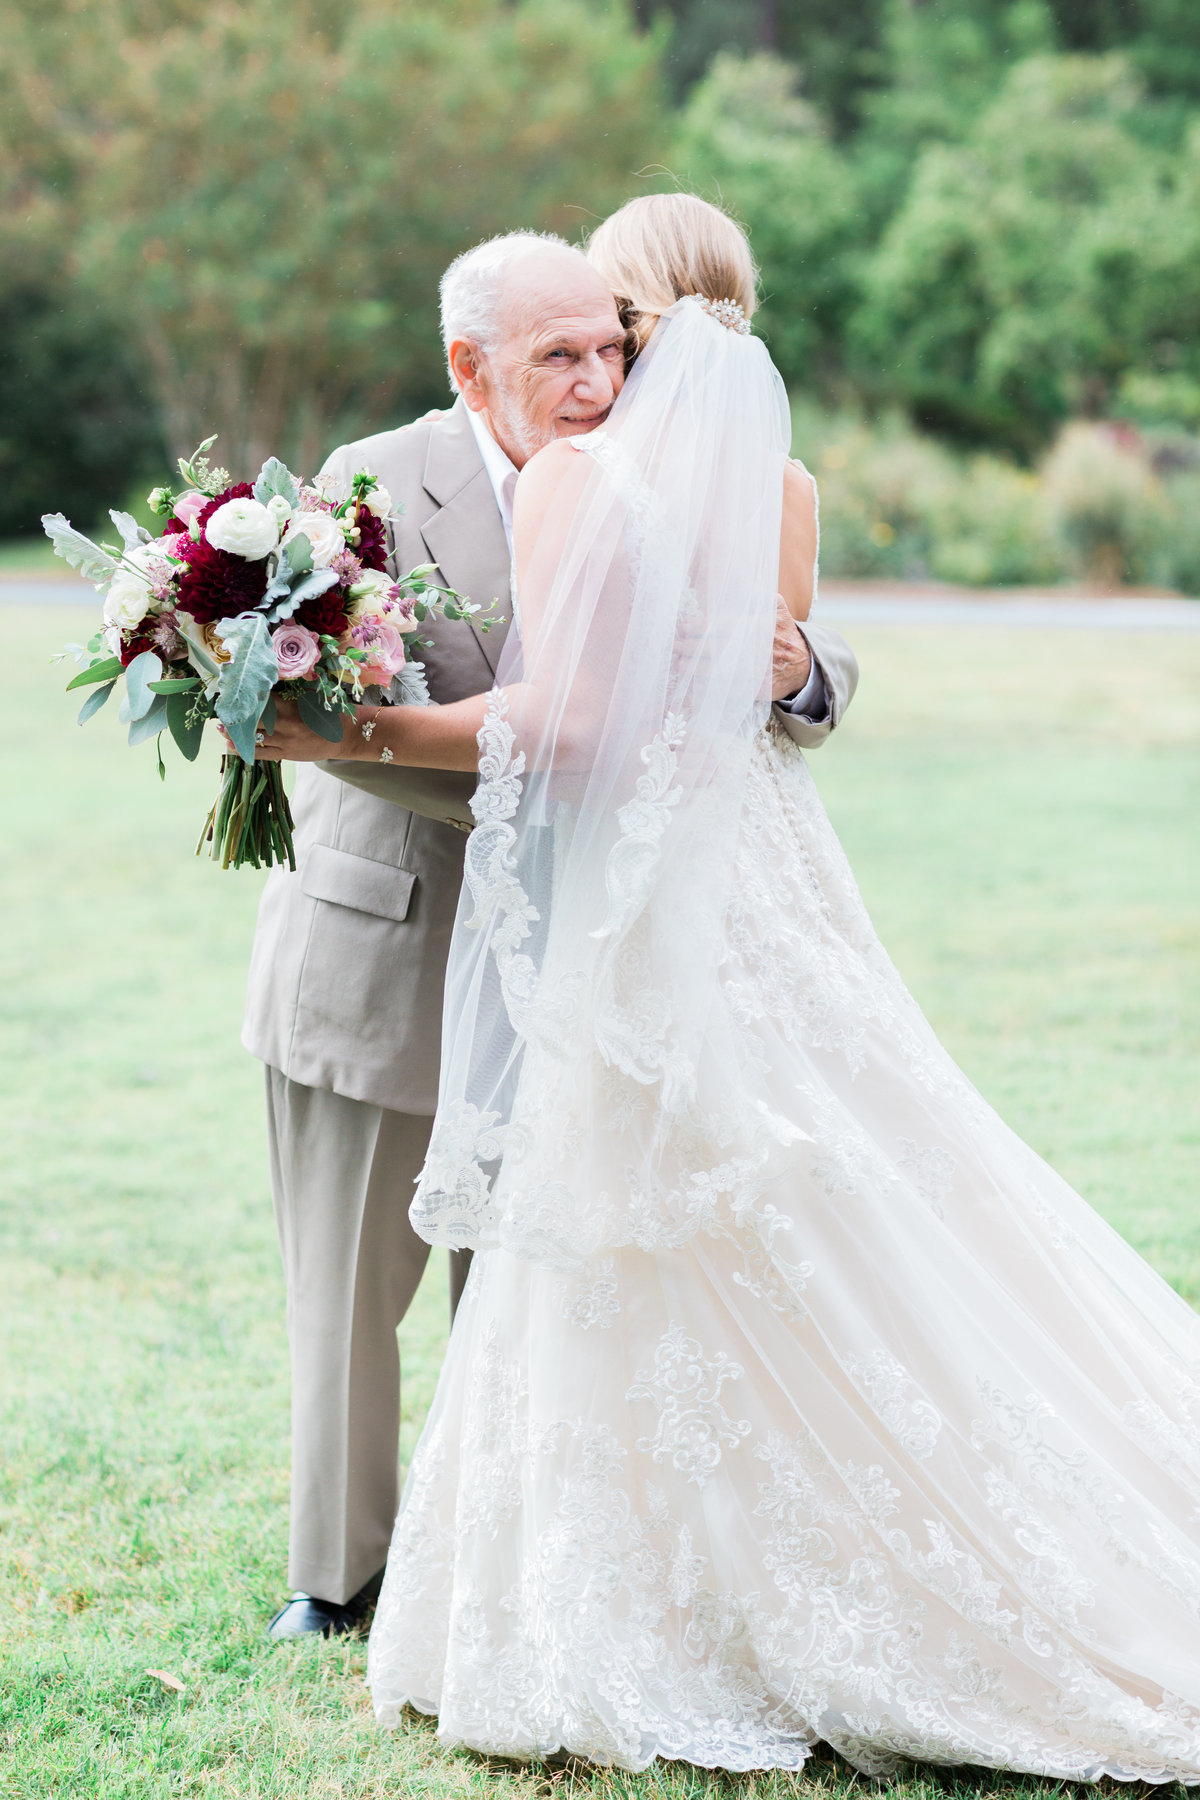 First look bride + Grandfather